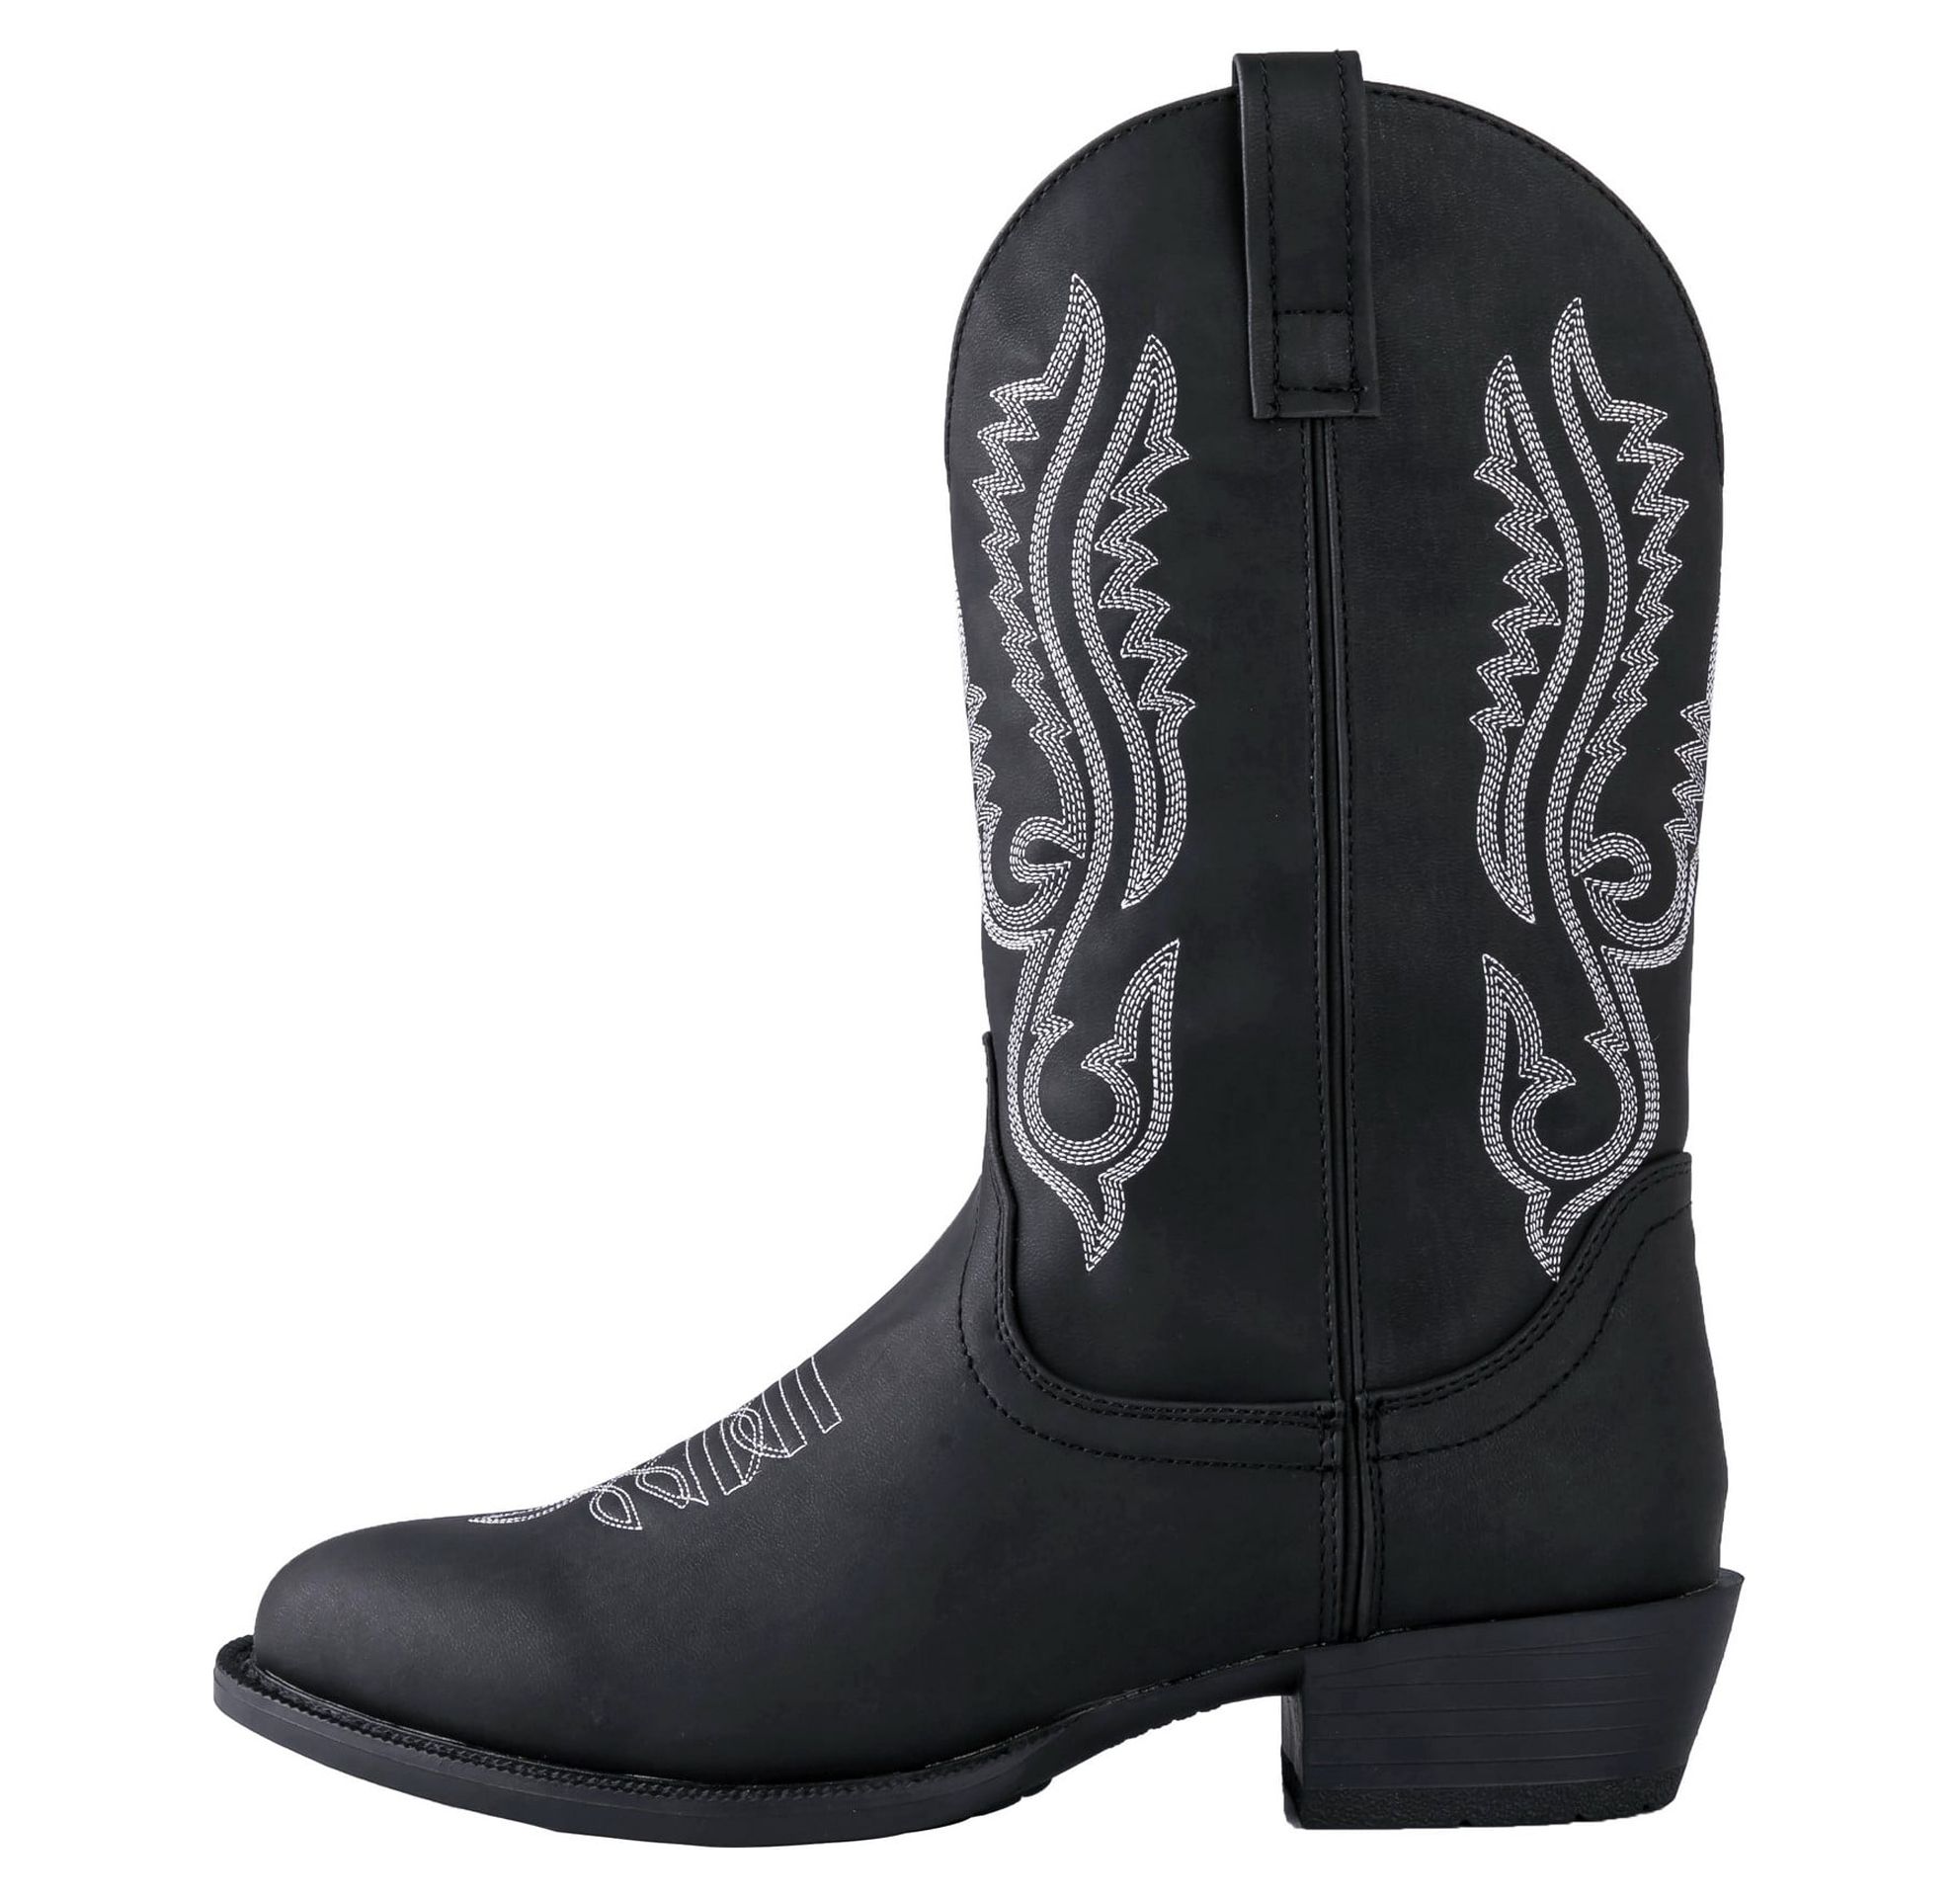 Canyon Trails Mens Classic Durable Round Toe Embroidered Western Rodeo Cowboy Boots - image 3 of 7